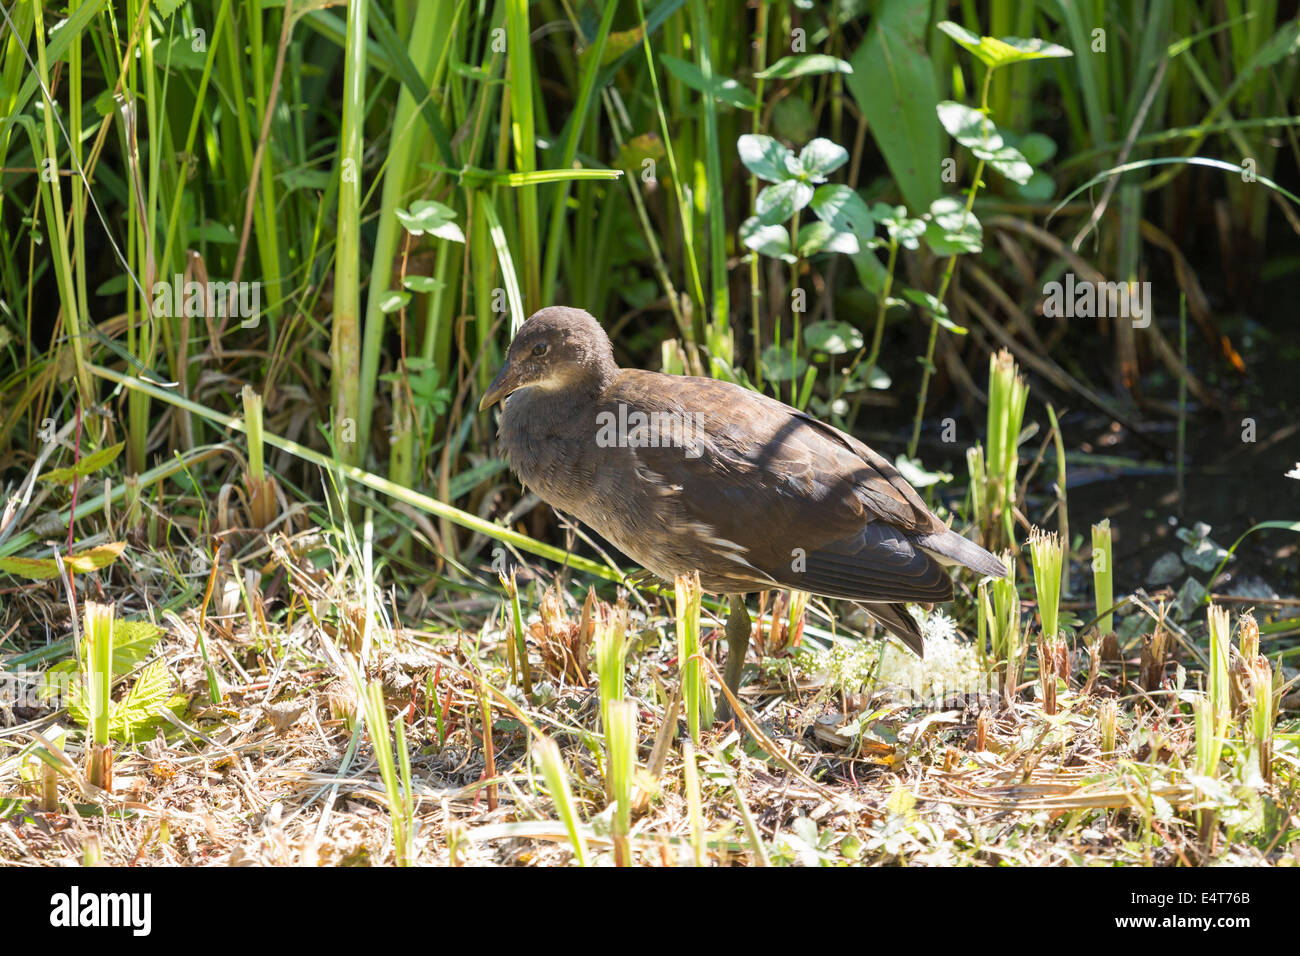 Juvenile common moorhen (Gallinula chloropus) standing in reeds at Arundel Wildfowl and Wetlands Trust, West Sussex, UK Stock Photo